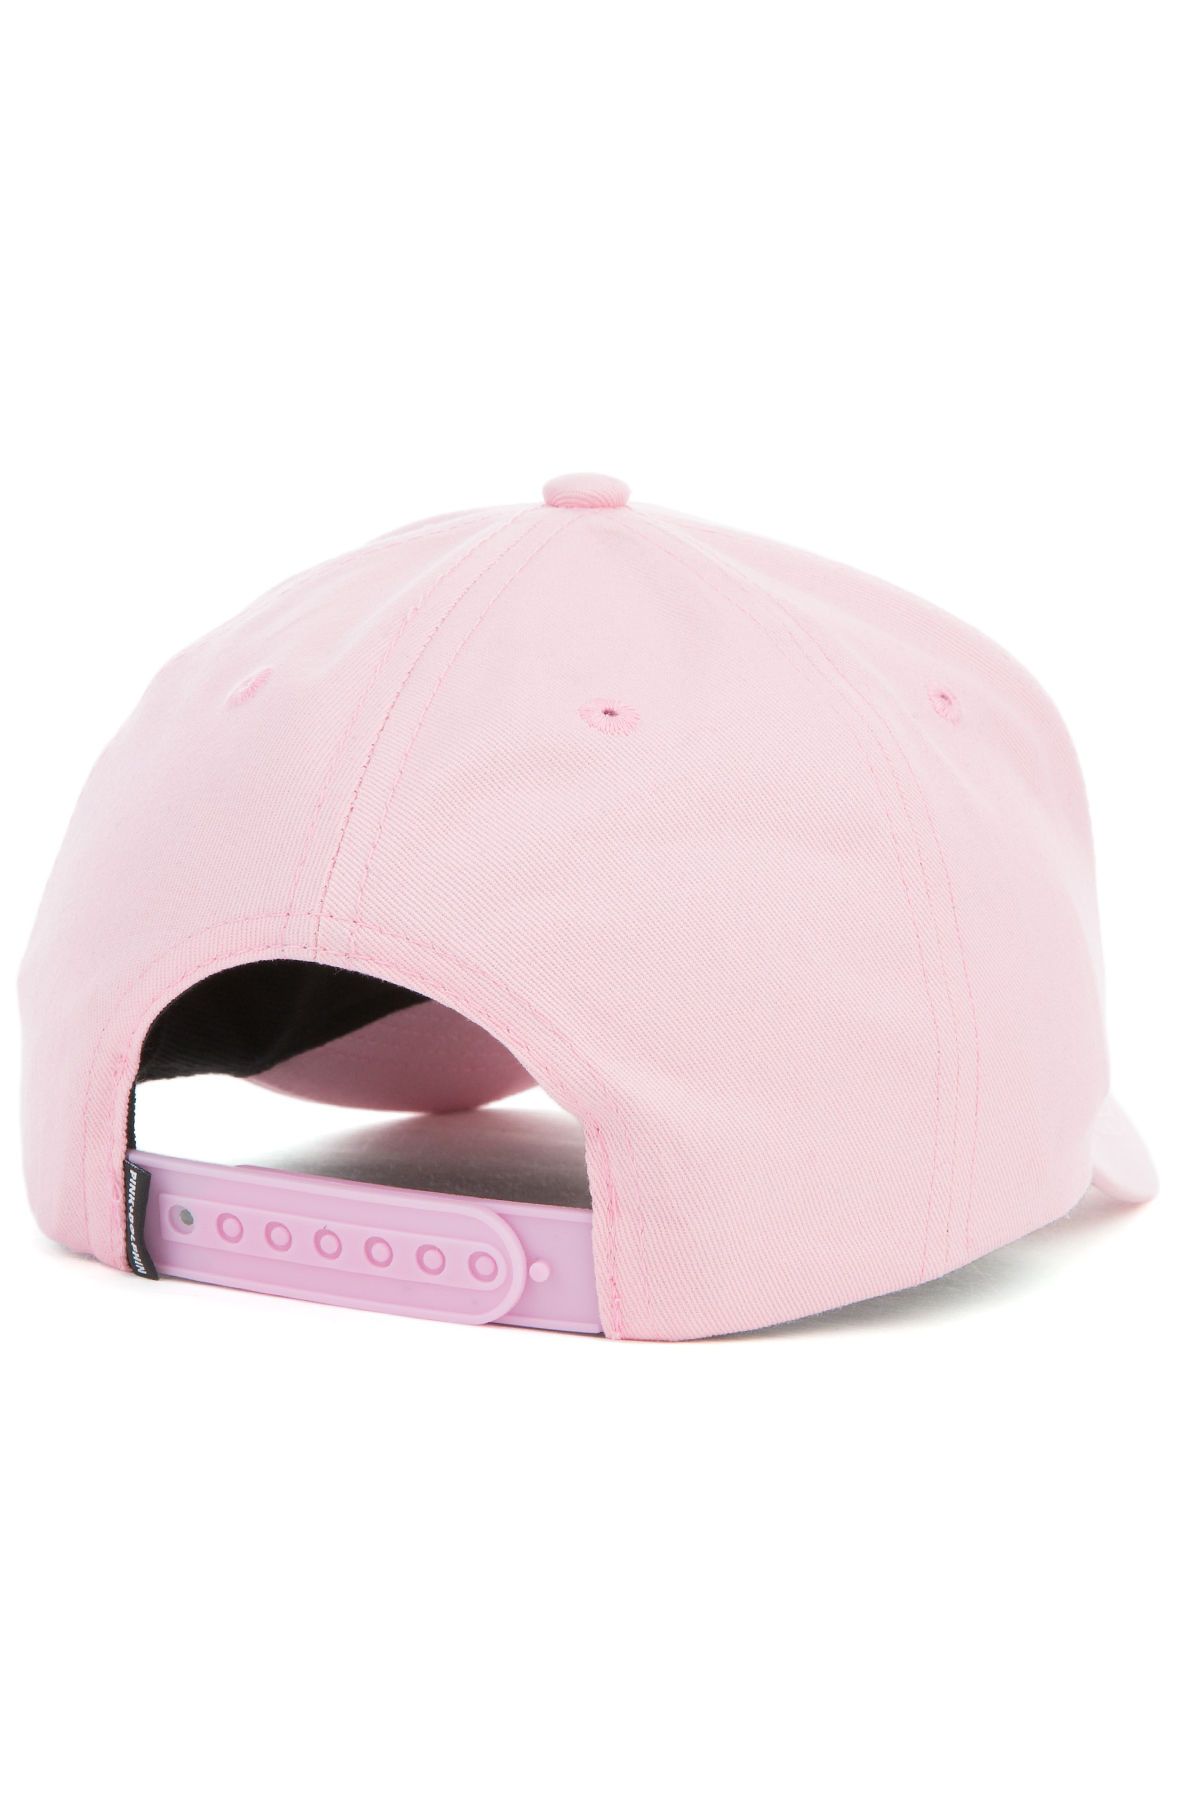 PINK DOLPHIN The Portrait Zoom Hat in OH11709PZBU - Shiekh